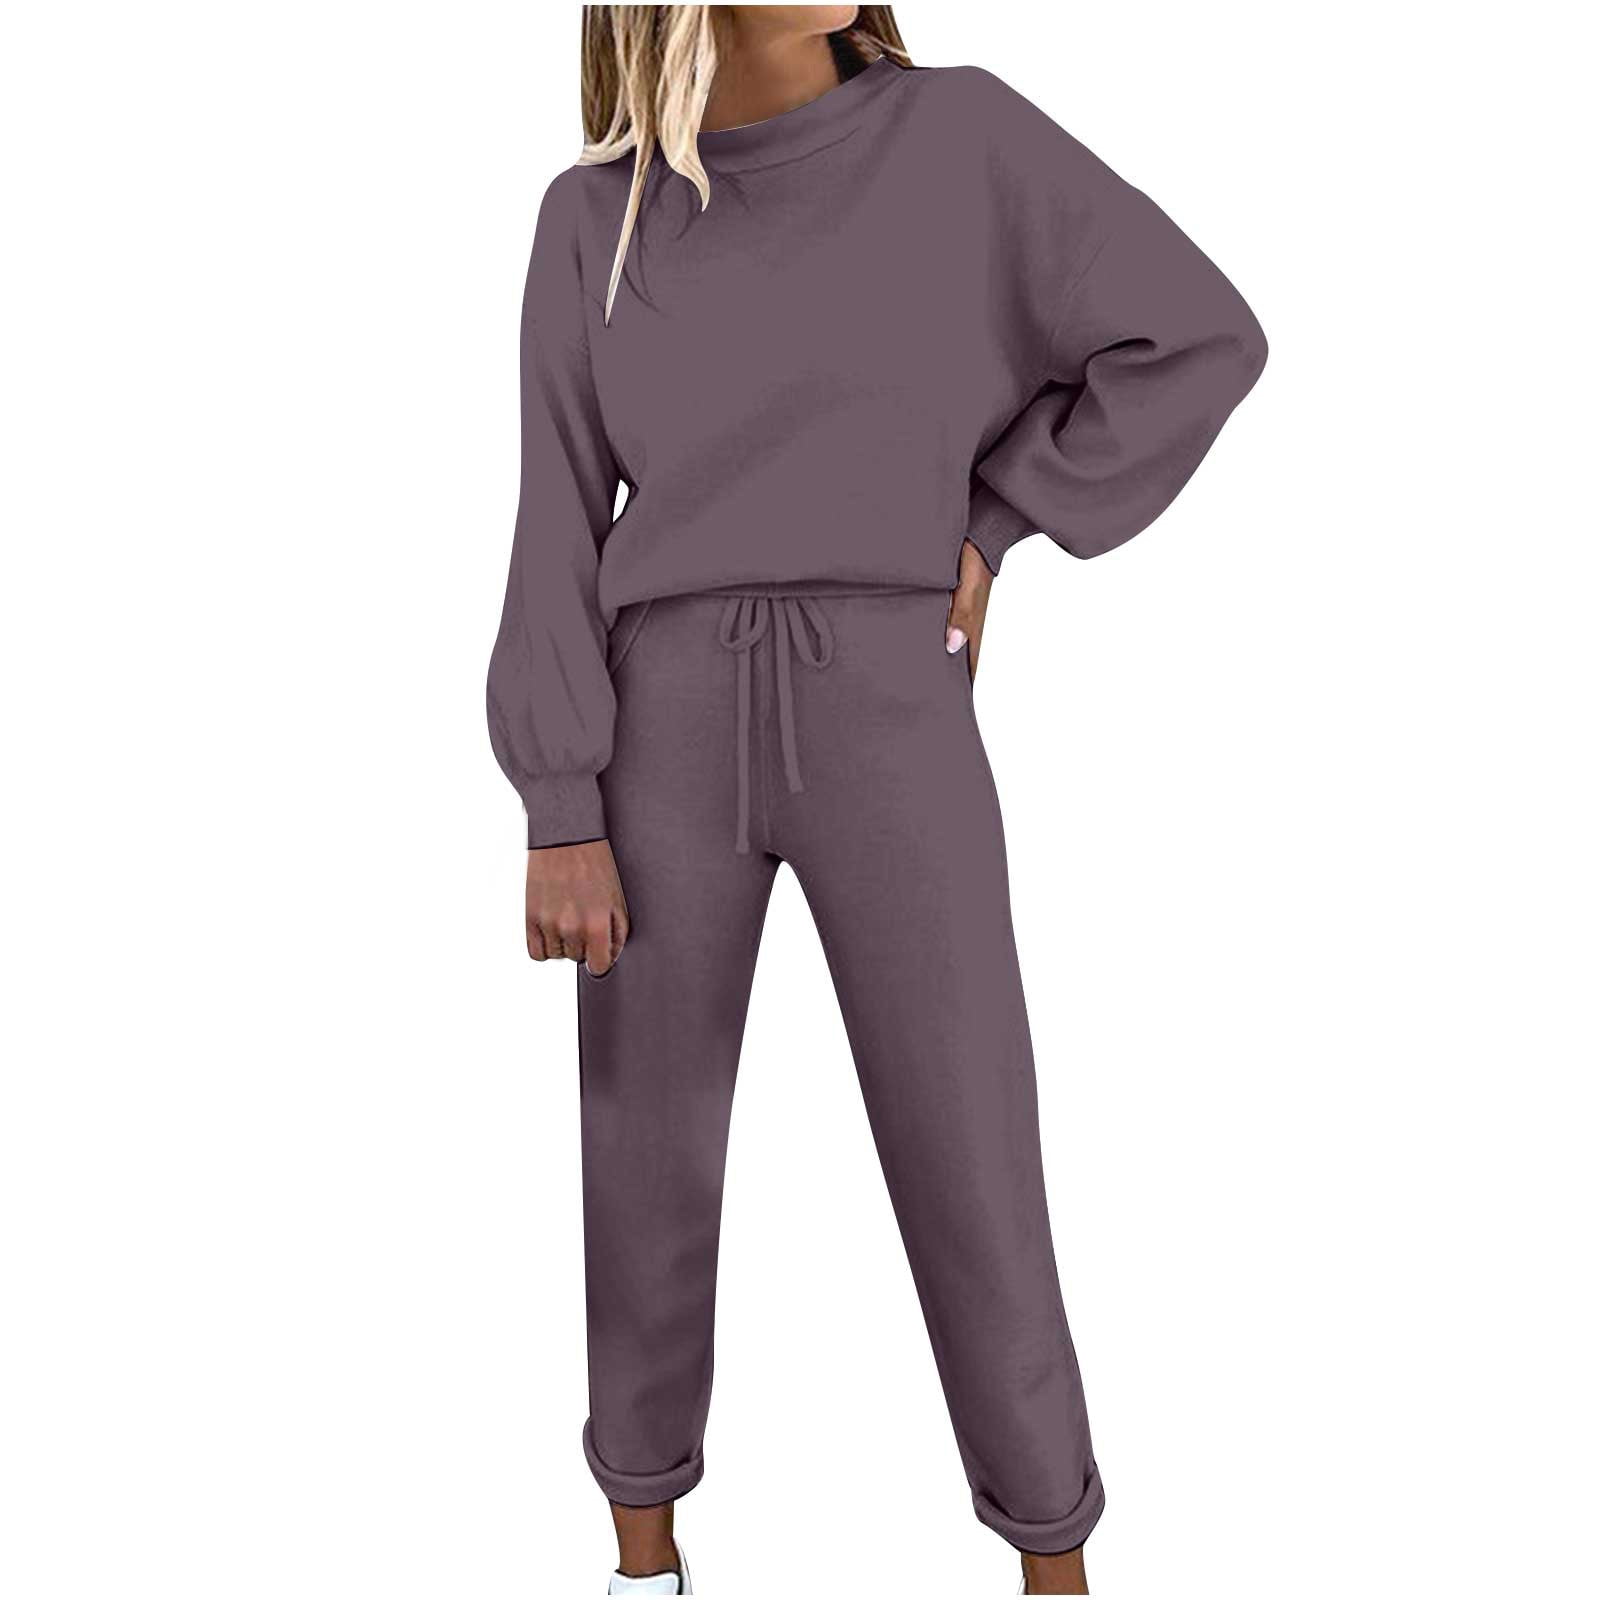 Tracksuit Sets Womens Ladies 2 Piece Sweatsuits Pullover Hoodie & Sweatpants  Jogging Suits Outfits